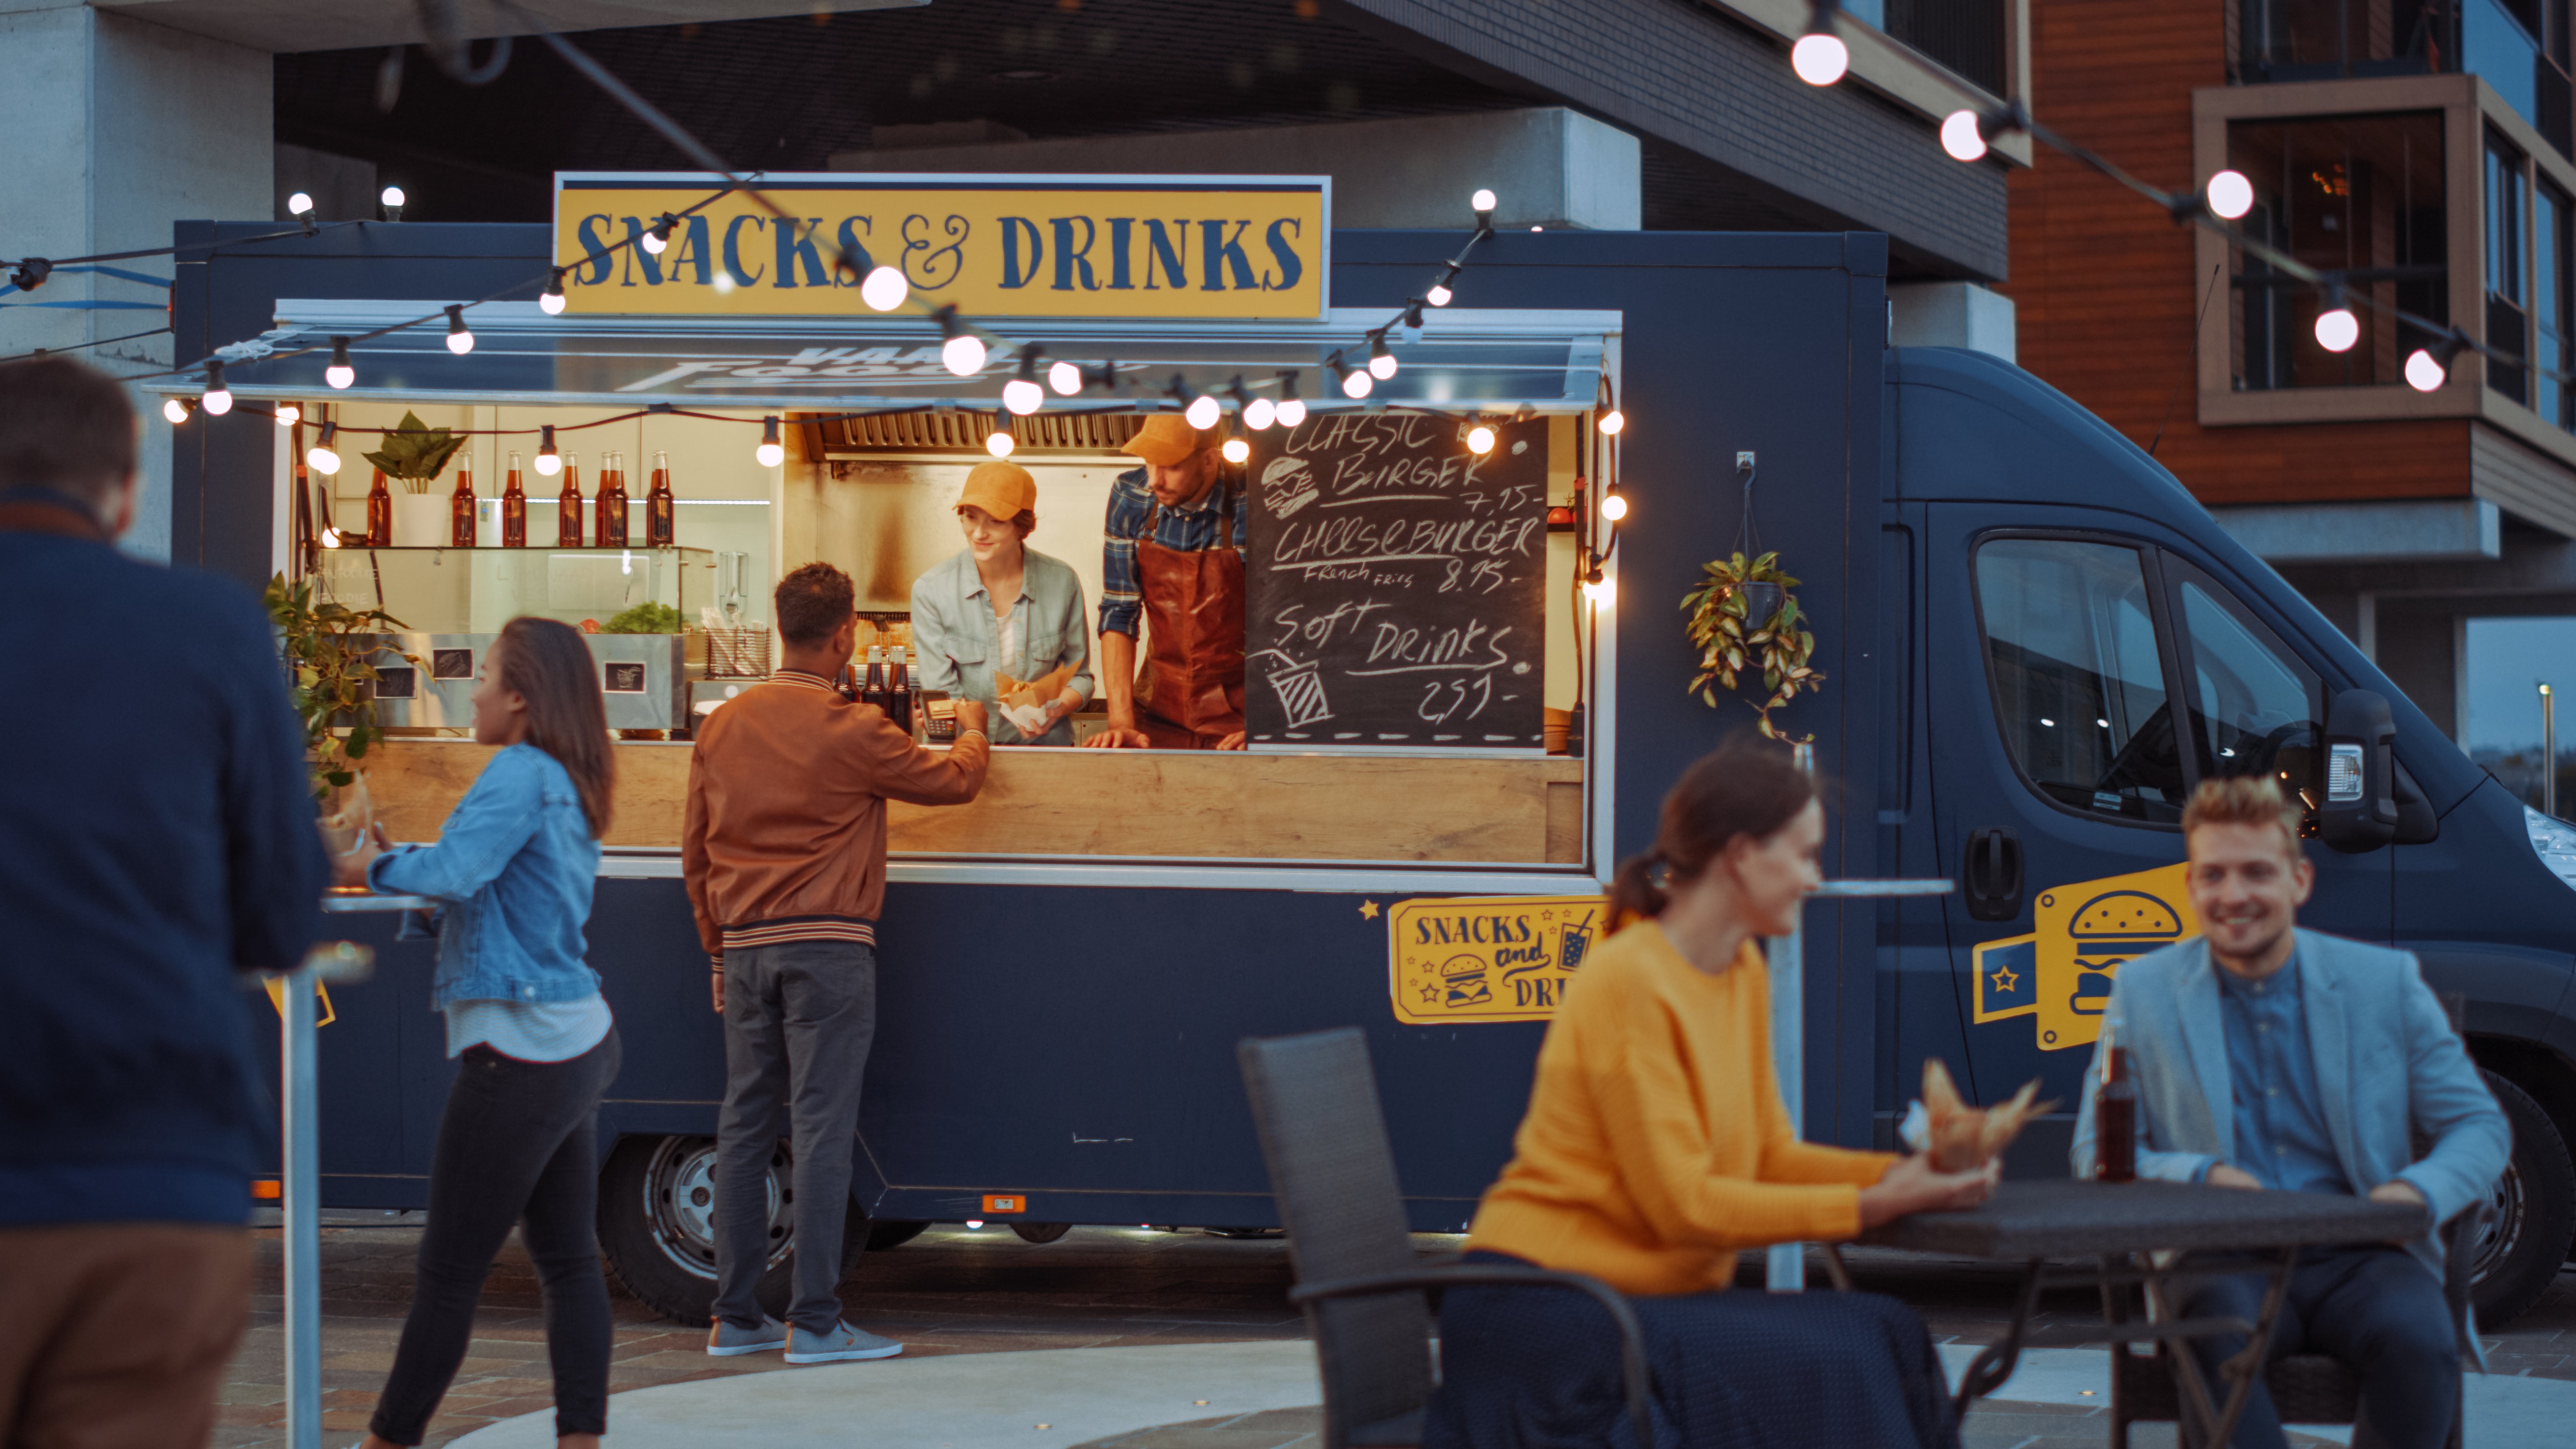 Choosing between starting a food truck or opening a restaurant can be challenging. This guide breaks down the pros and cons of both options to help you make an informed decision.